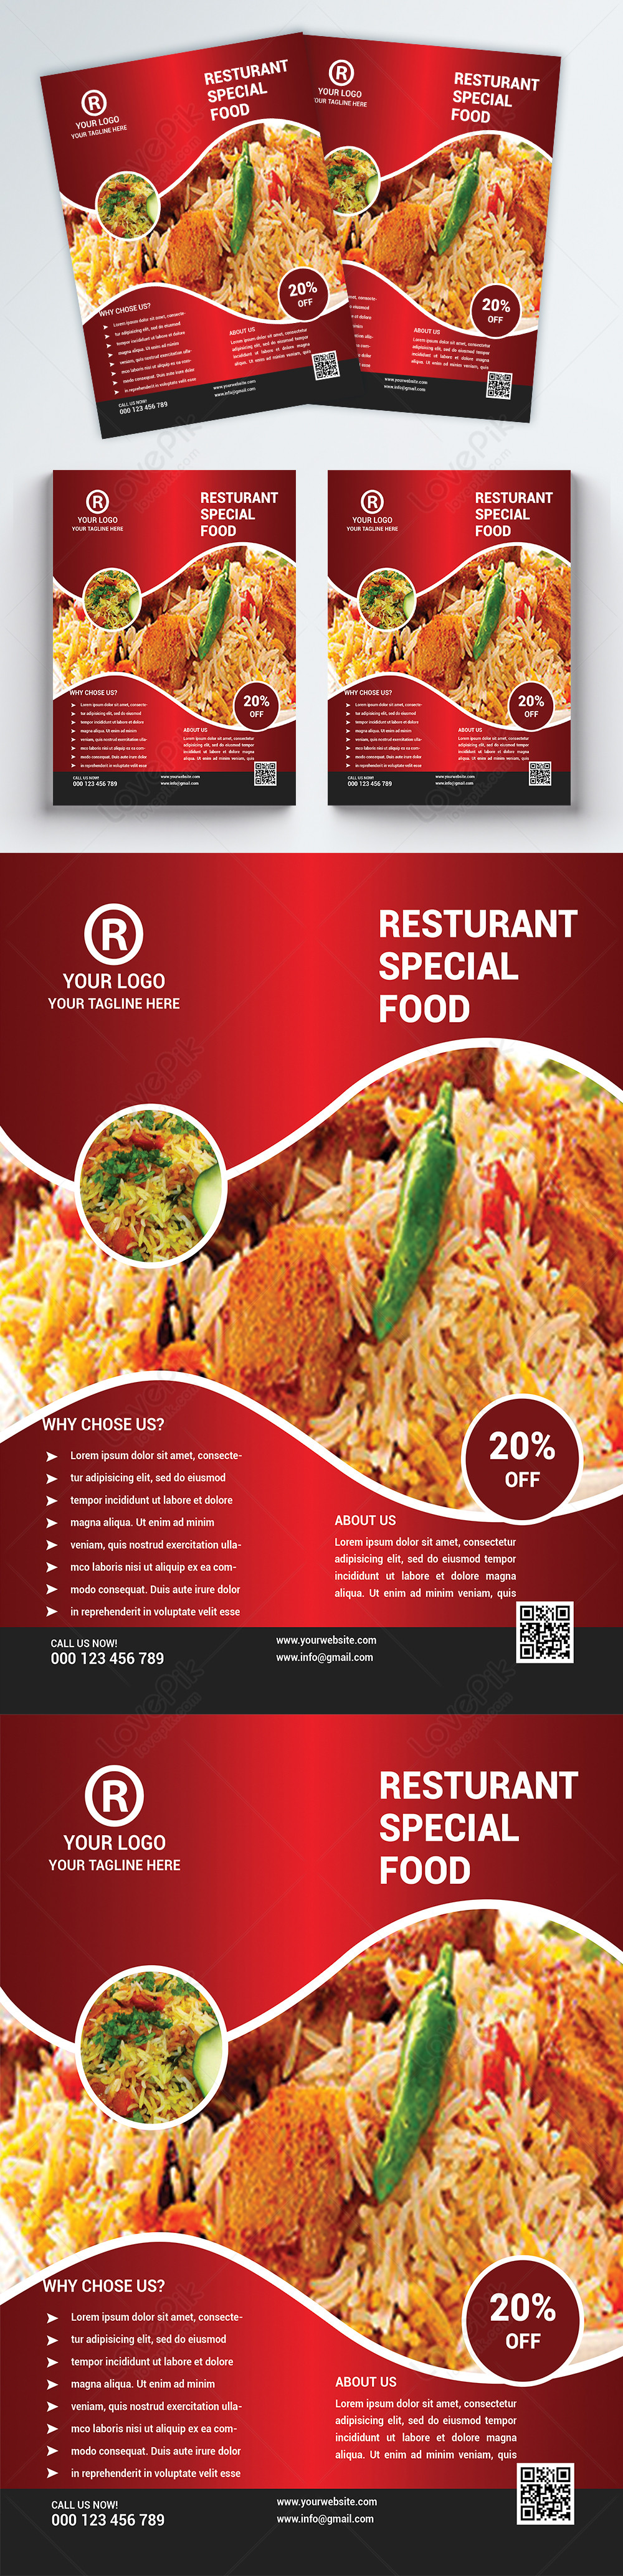 Red Concise Restaurant Food Promotion Flyer Template Image Picture Free Download Lovepik Com